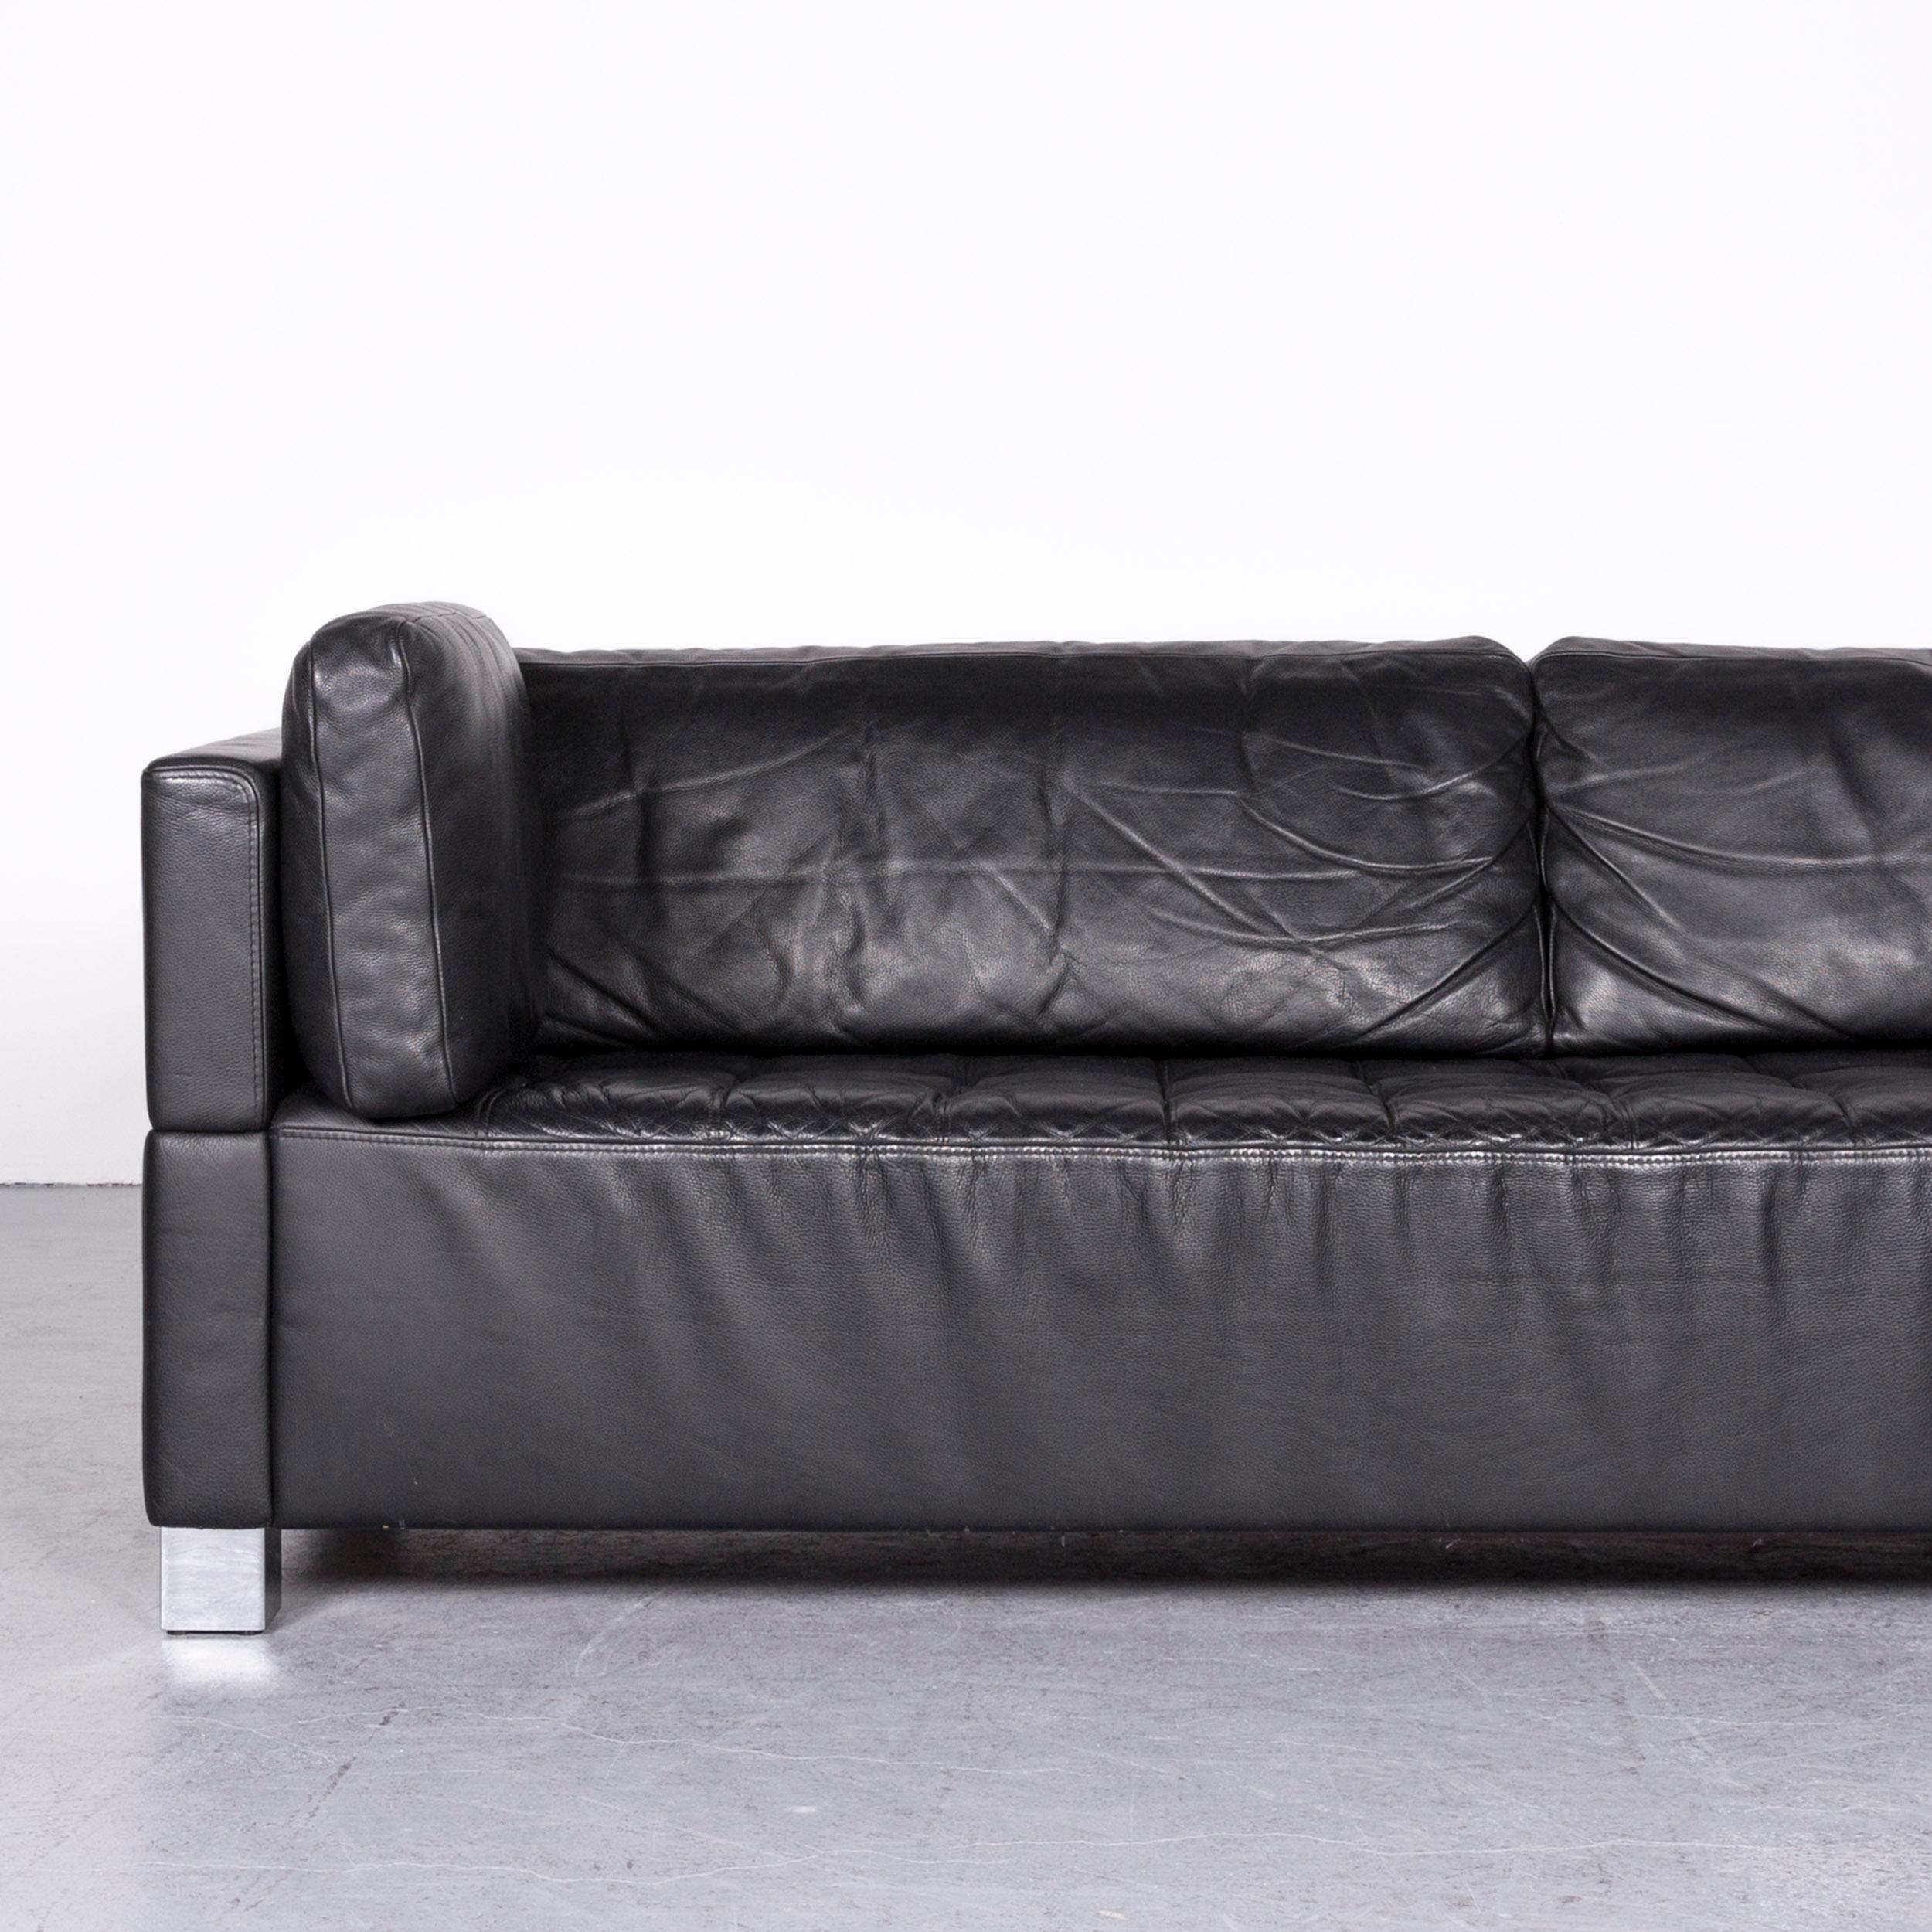 German Brühl & Sippold Carrée Designer Leather Sofa Black Three-Seat Couch